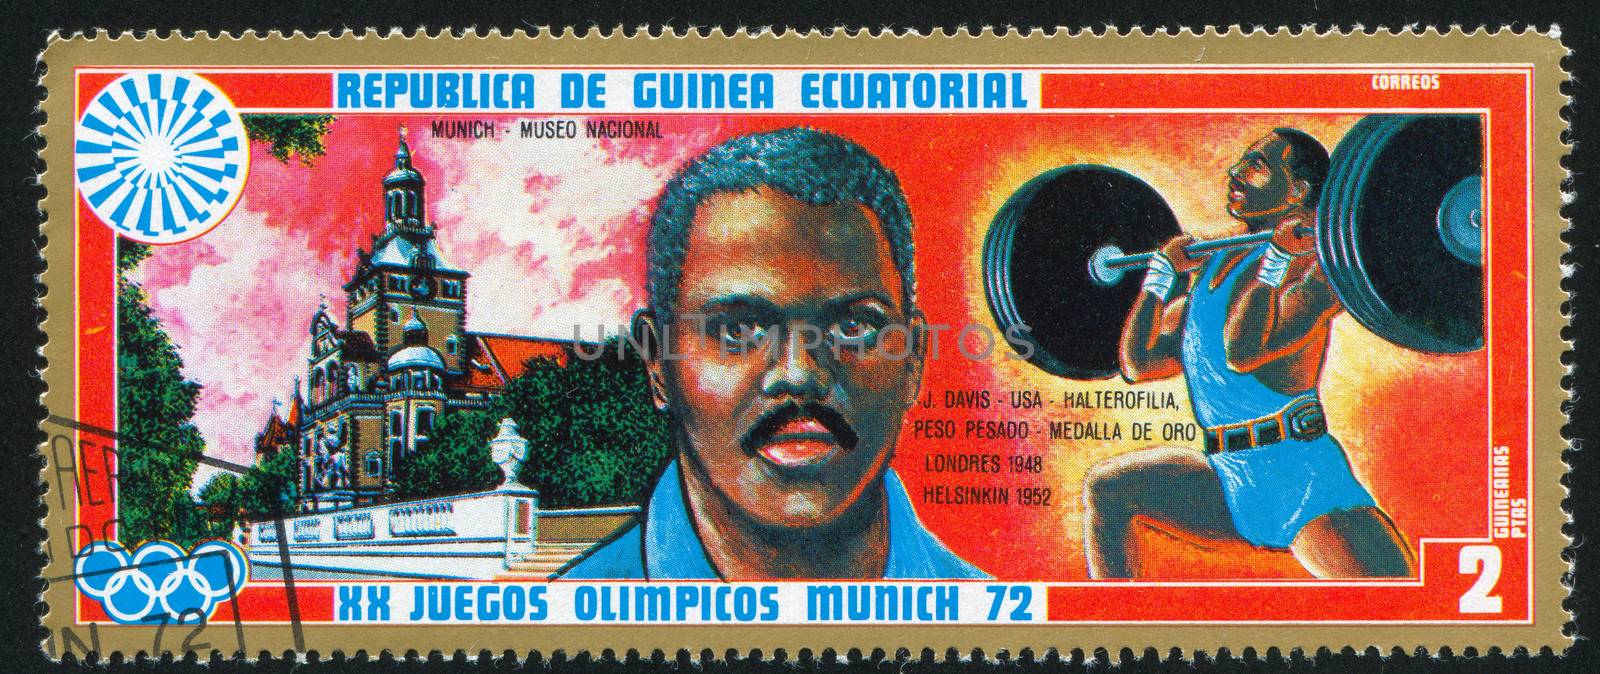 EQUATORIAL GUINEA - CIRCA 1972: stamp printed by Equatorial Guinea, shows National Museum in Munich and Weightlifting, circa 1972